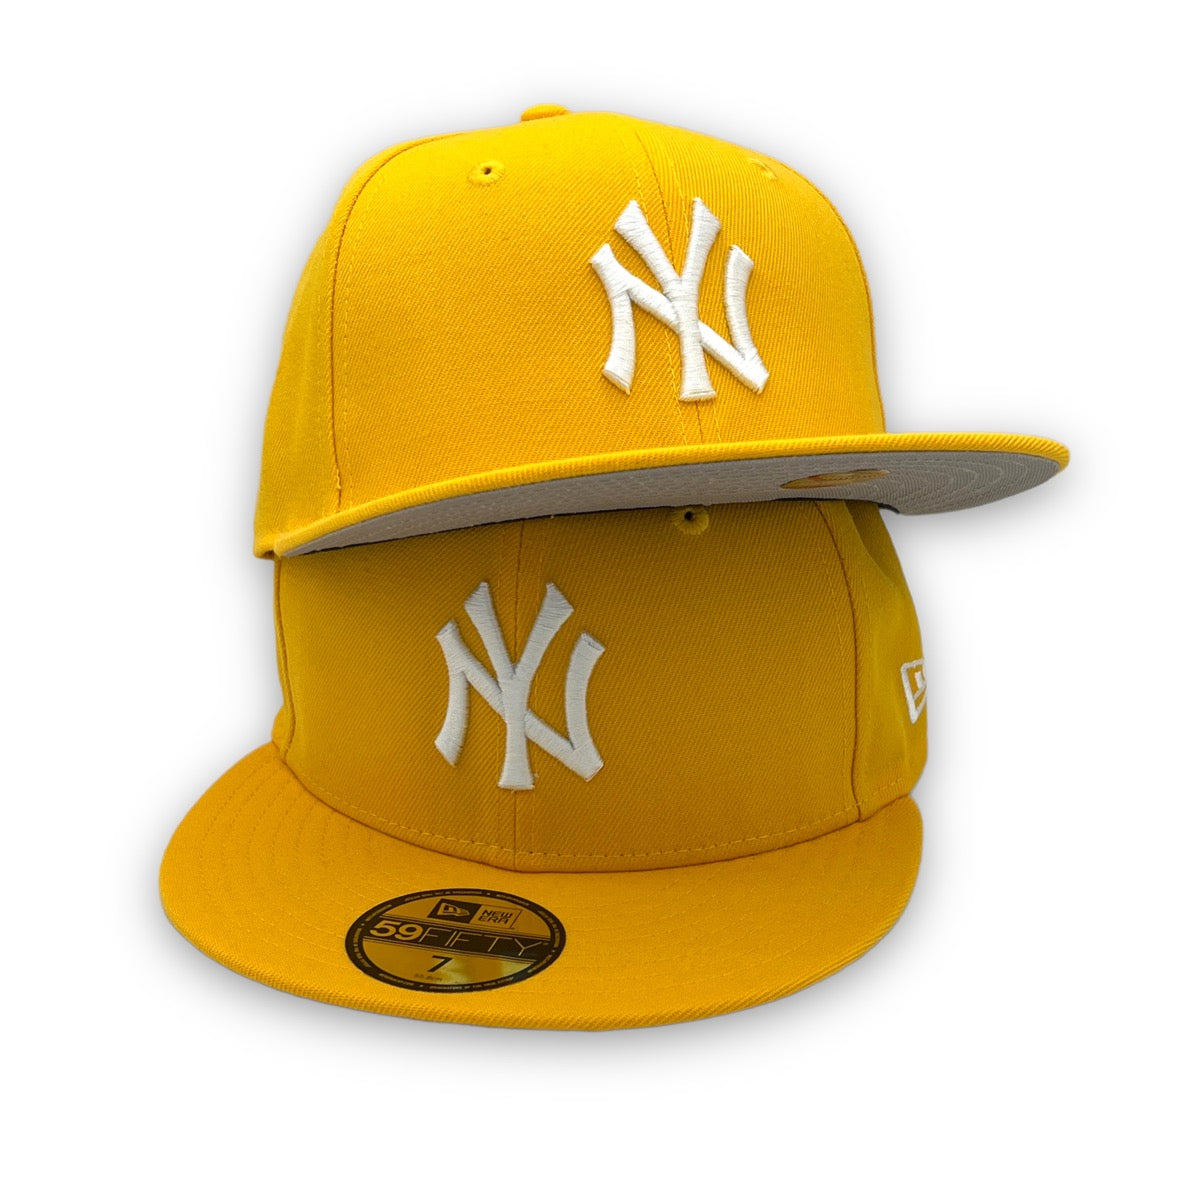 NY Yankees Basic New Era 59FIFTY Yellow Fitted Hat – USA CAP